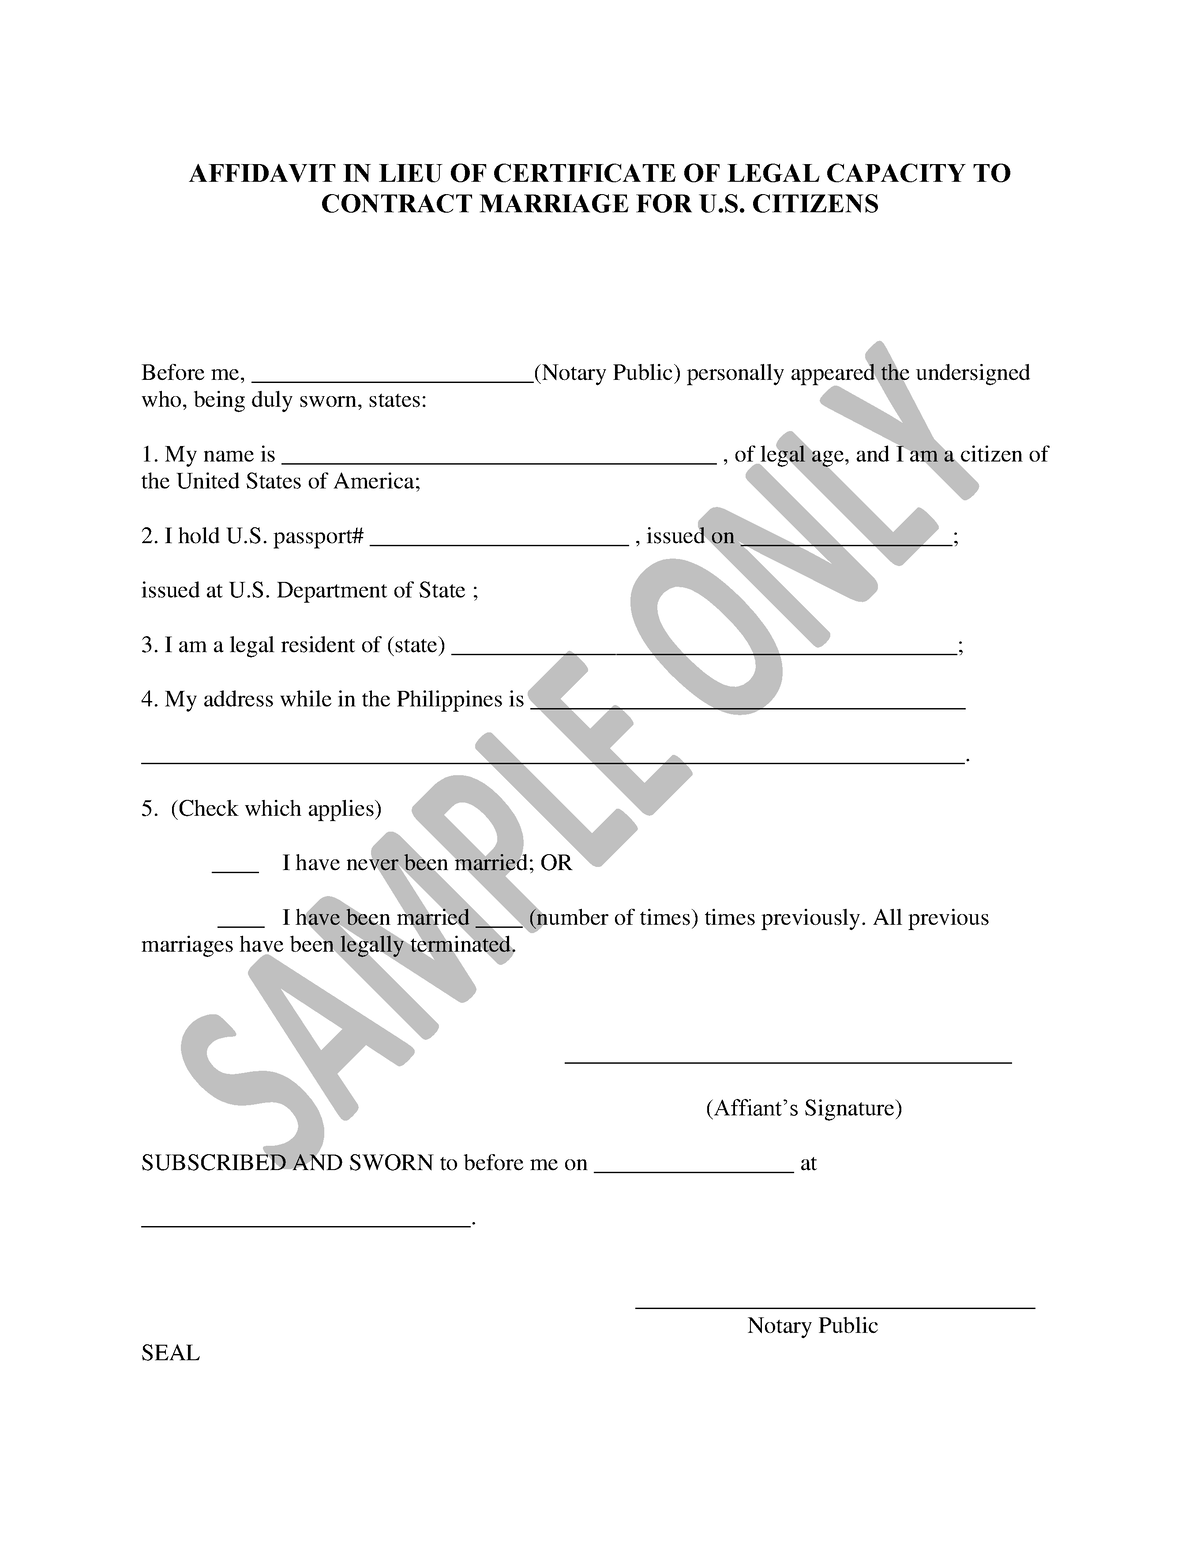 Affidavit of Legal Capacity to Contract Marriage AFFIDAVIT IN LIEU OF